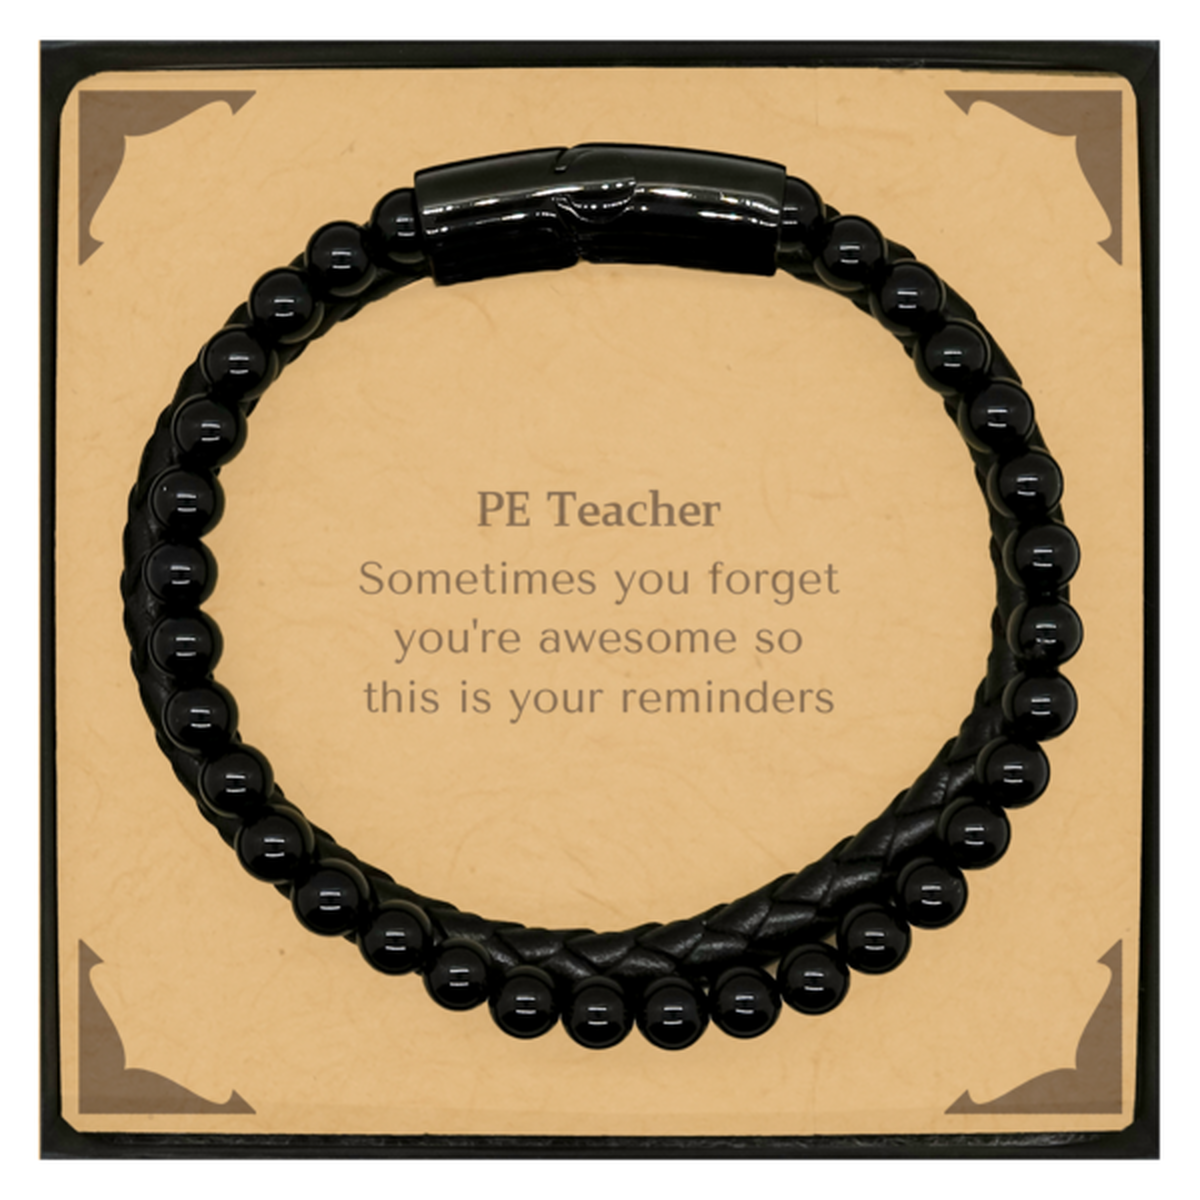 Sentimental PE Teacher Stone Leather Bracelets, PE Teacher Sometimes you forget you're awesome so this is your reminders, Graduation Christmas Birthday Gifts for PE Teacher, Men, Women, Coworkers